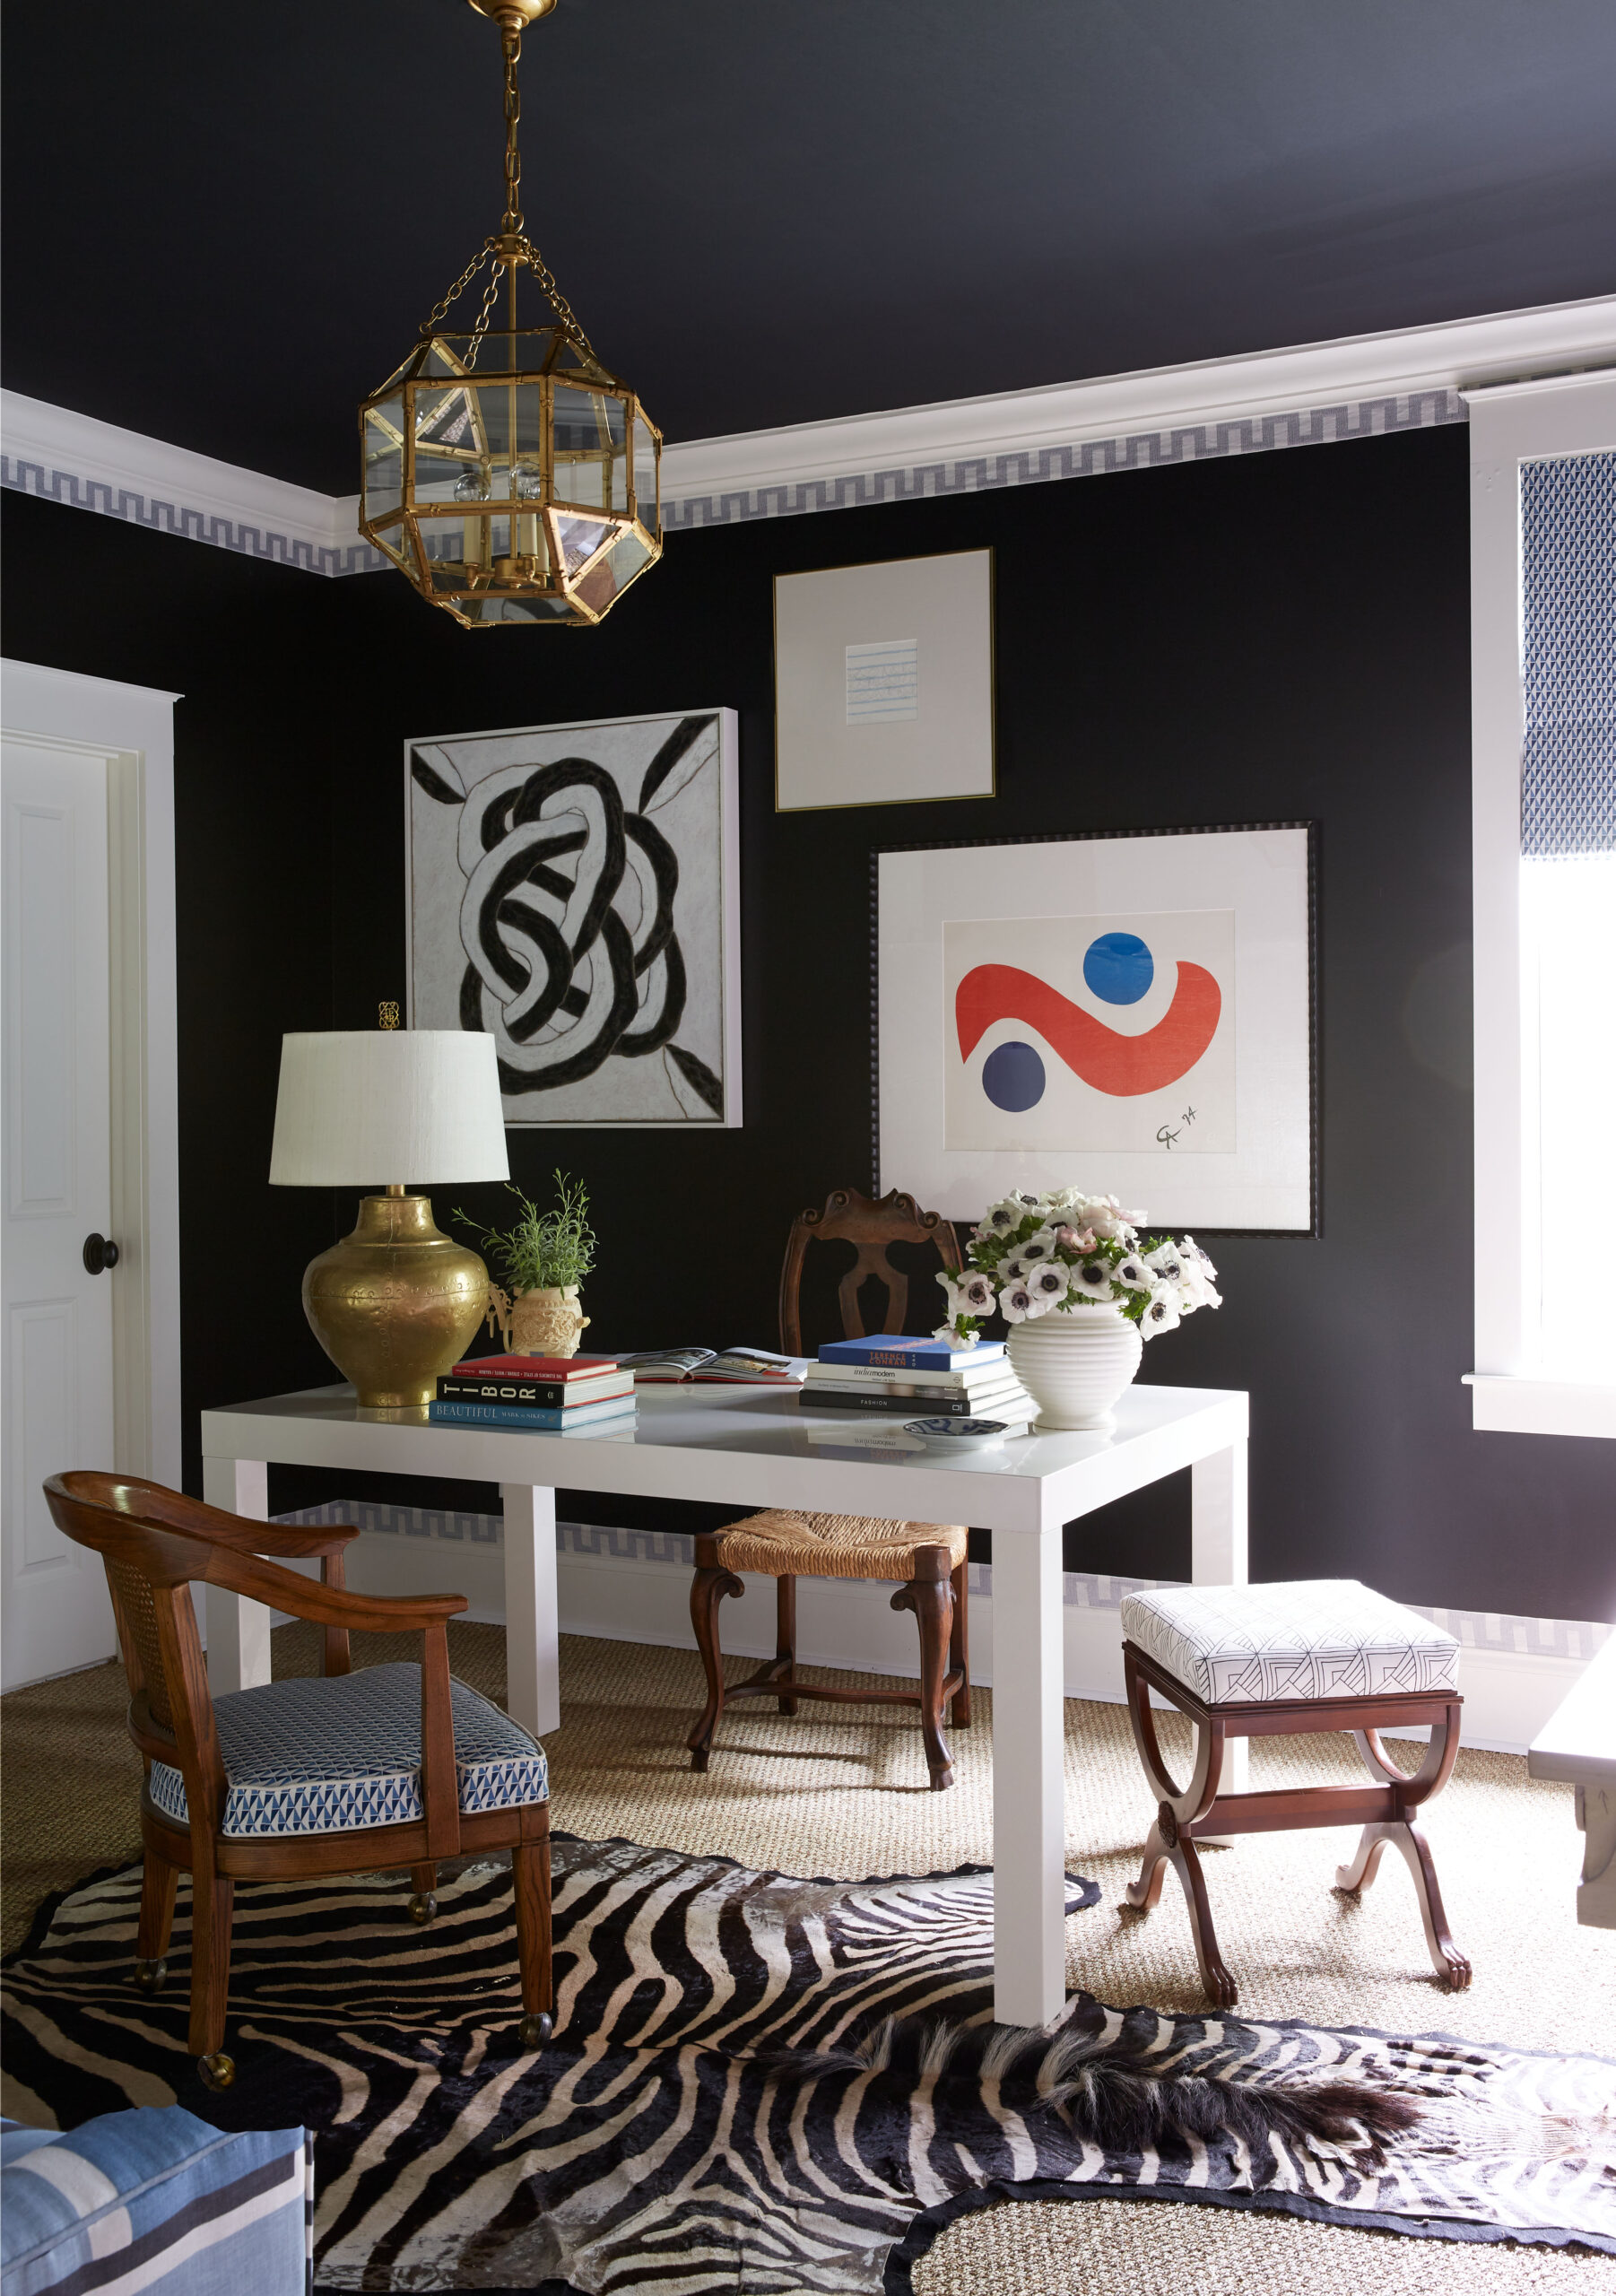 How to Outline Your Walls With Trim